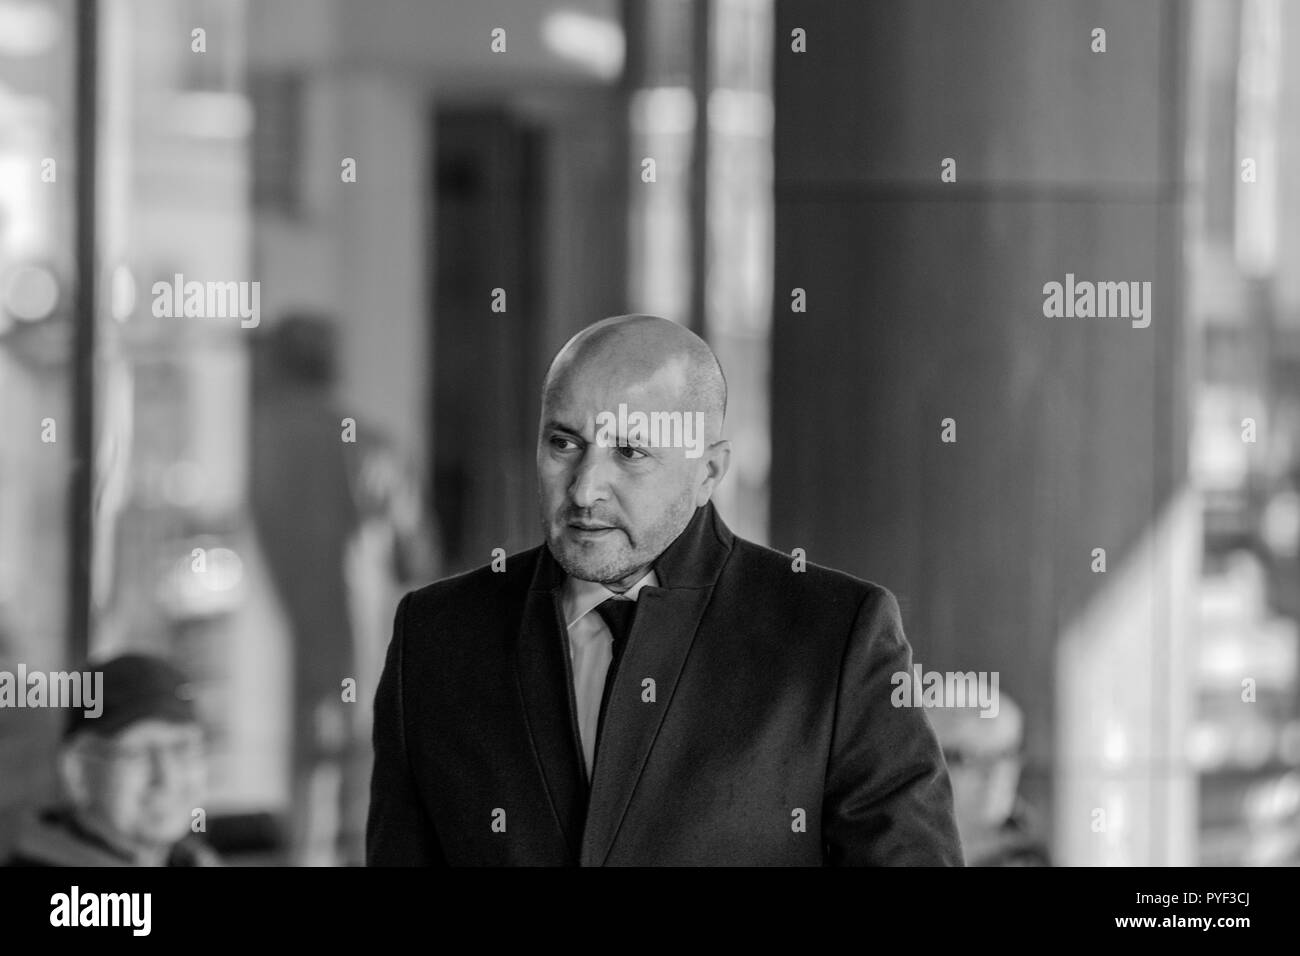 Ahmed Marcouch At The Memorial Ceronomy At The Concertgebouw At Amsterdam 27-10-2018 The Netherlands In Black And White Stock Photo